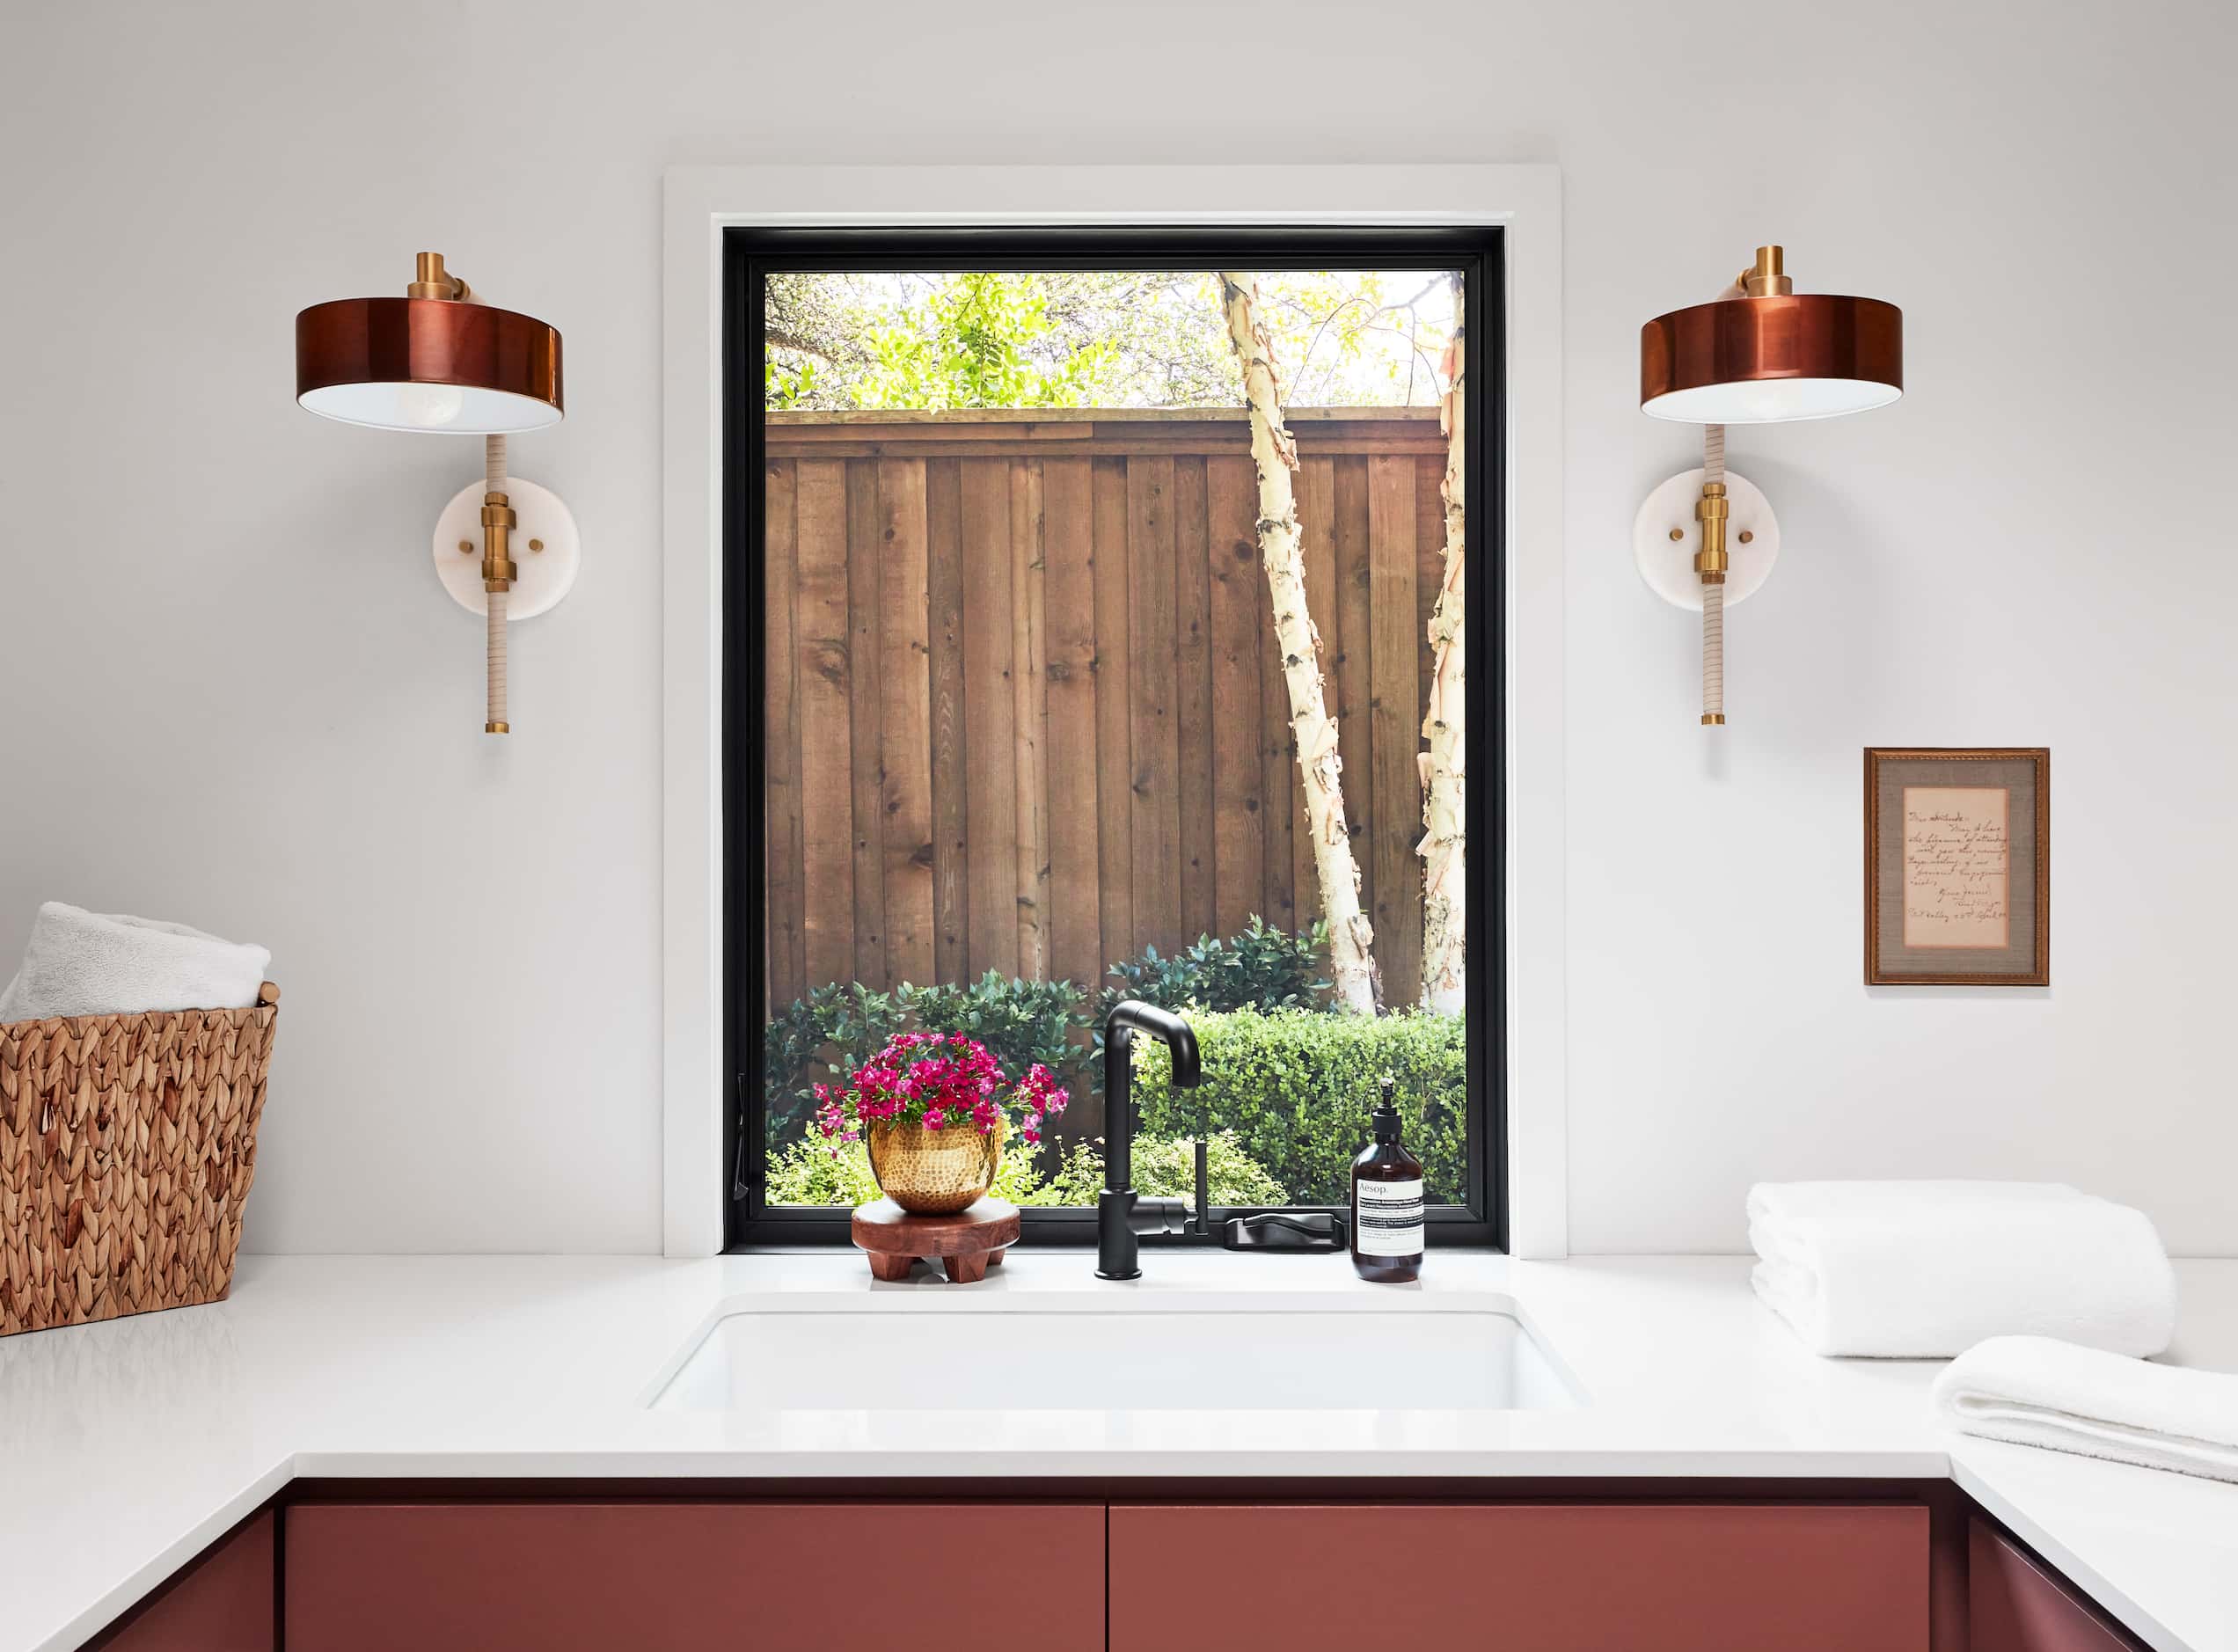 Laundry room sink in front of window with red cabinets beneath, red sconces frame window